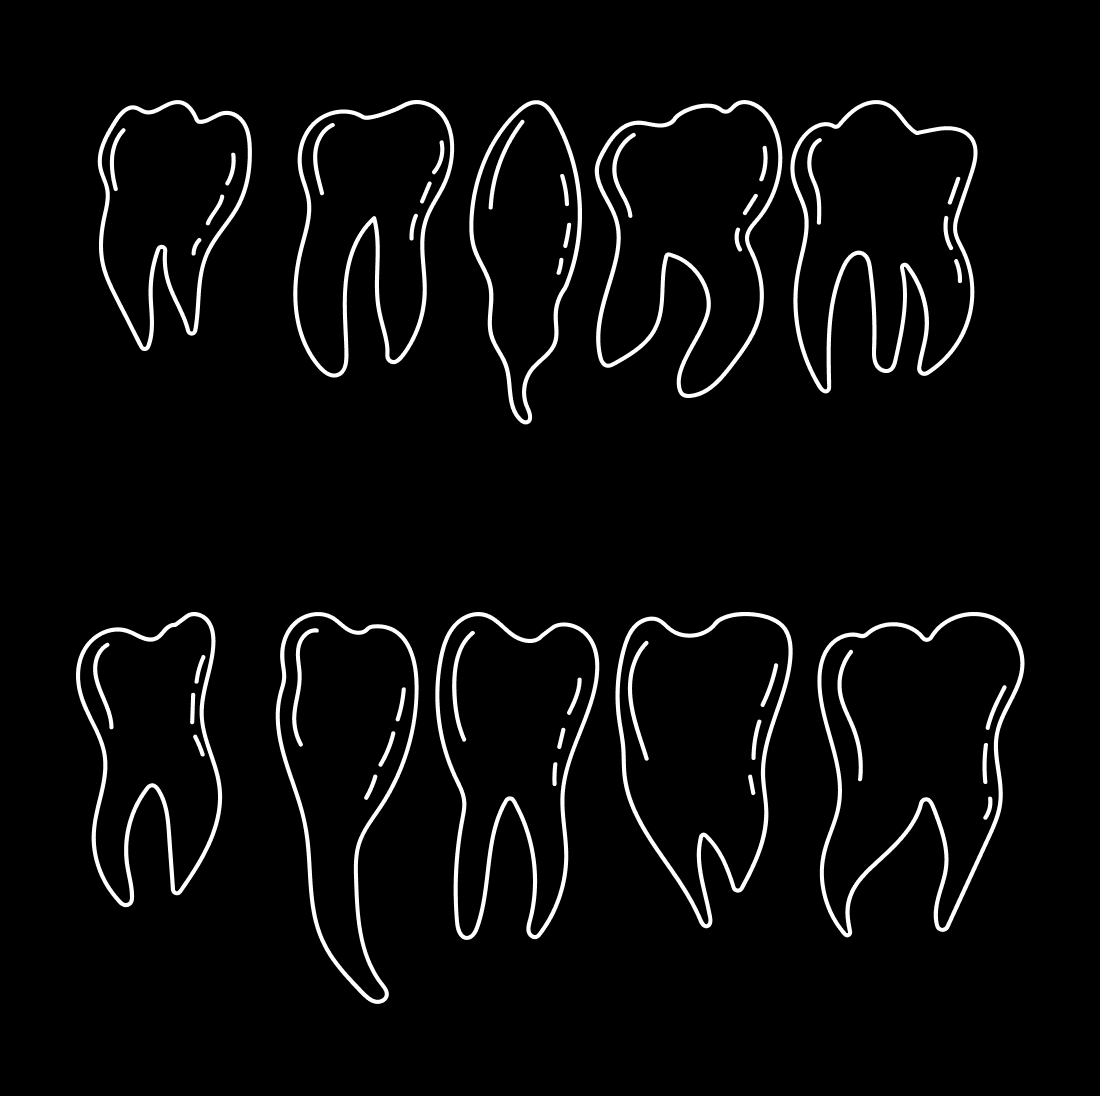 Ten white silhouettes of teeth on a black background.